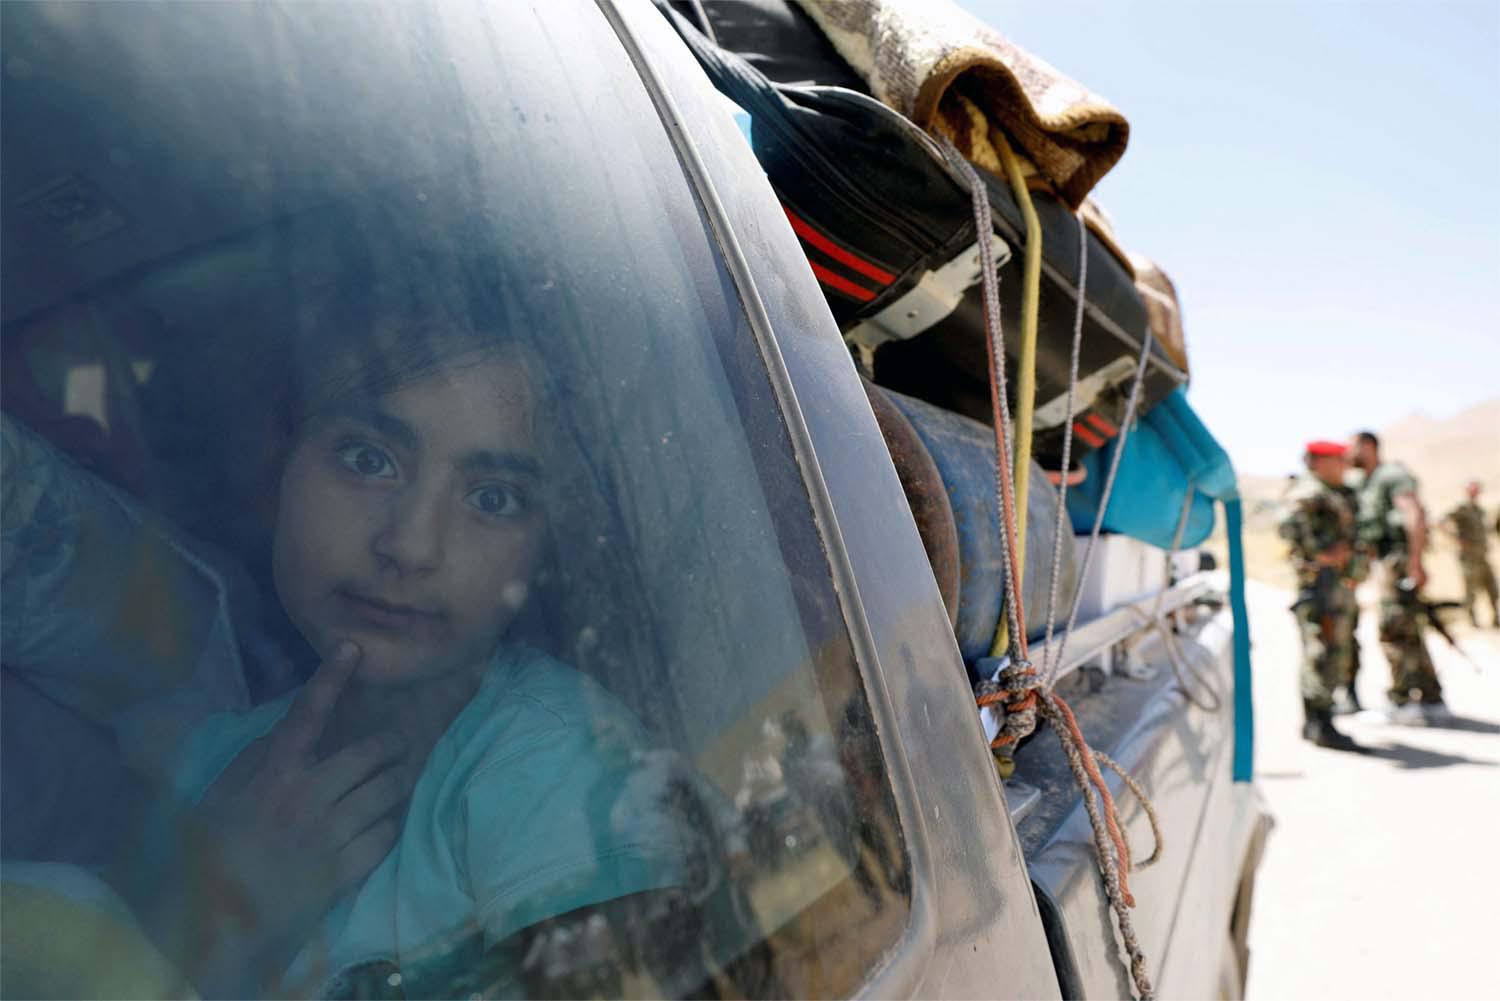 A Syrian refugee girl who left Lebanon looks through a window as she arrives in Qalamoun, Syria